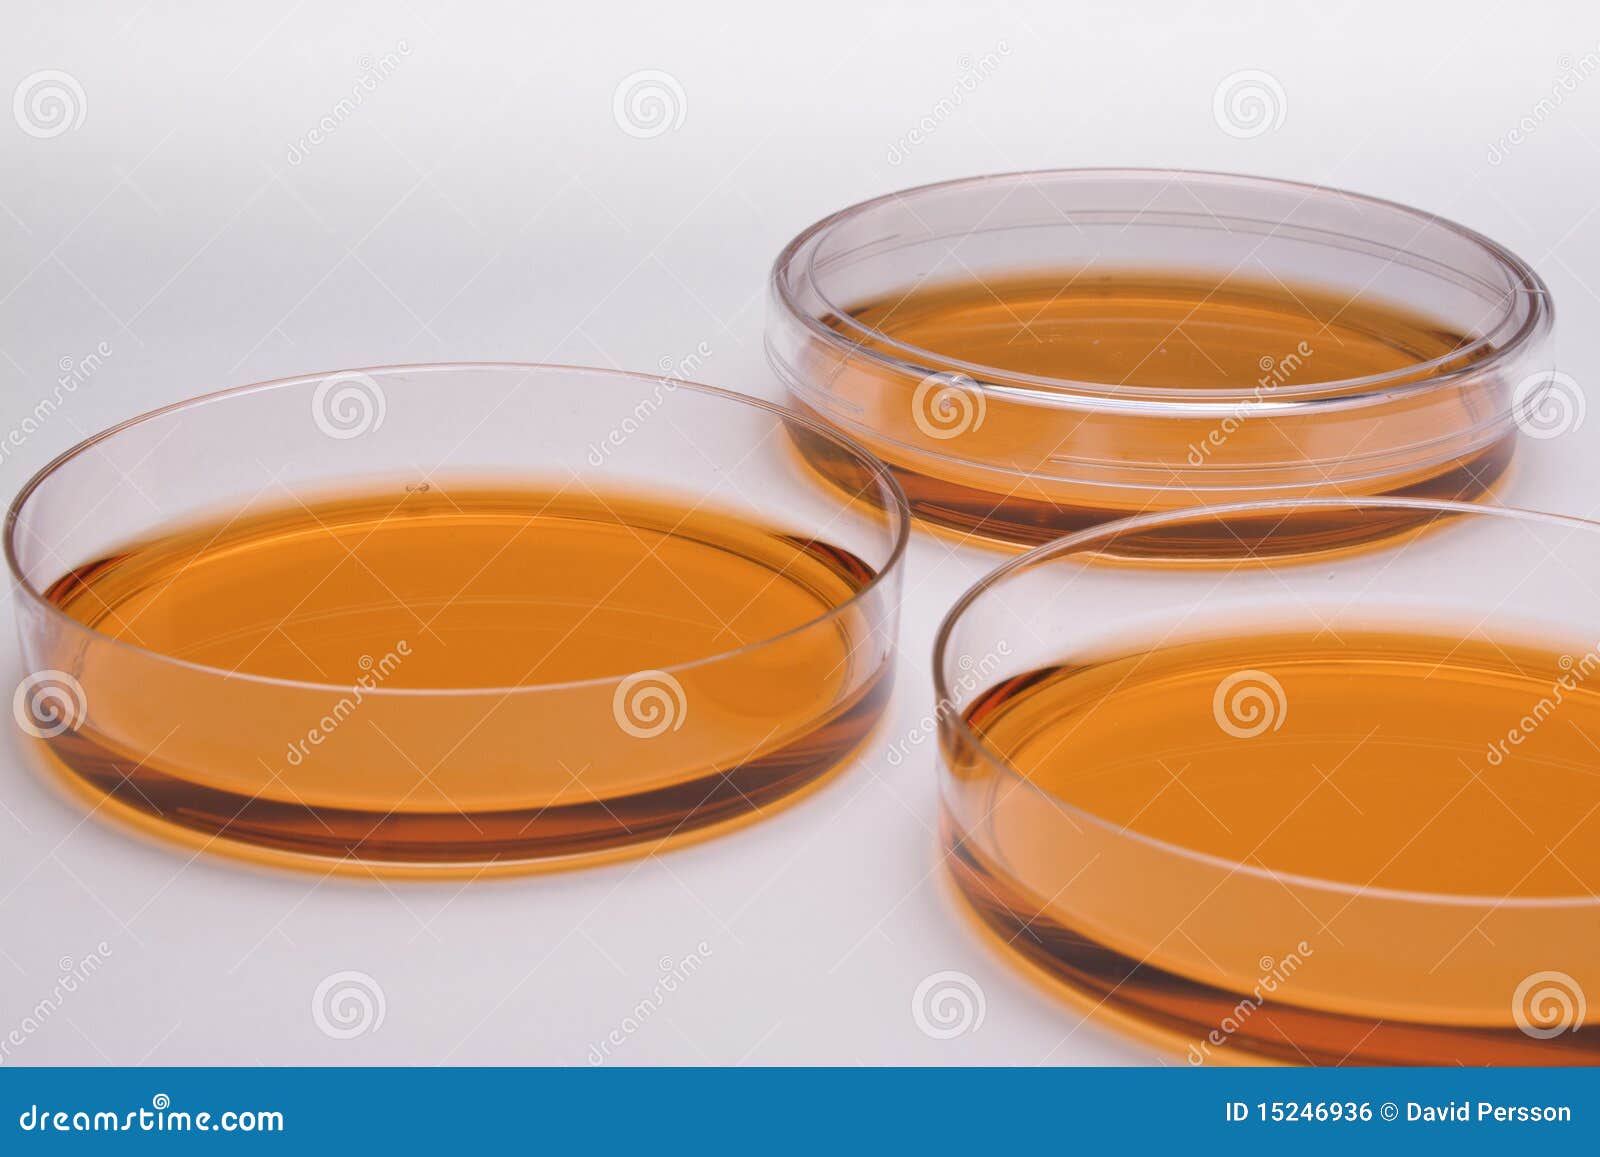 cell culture dishes